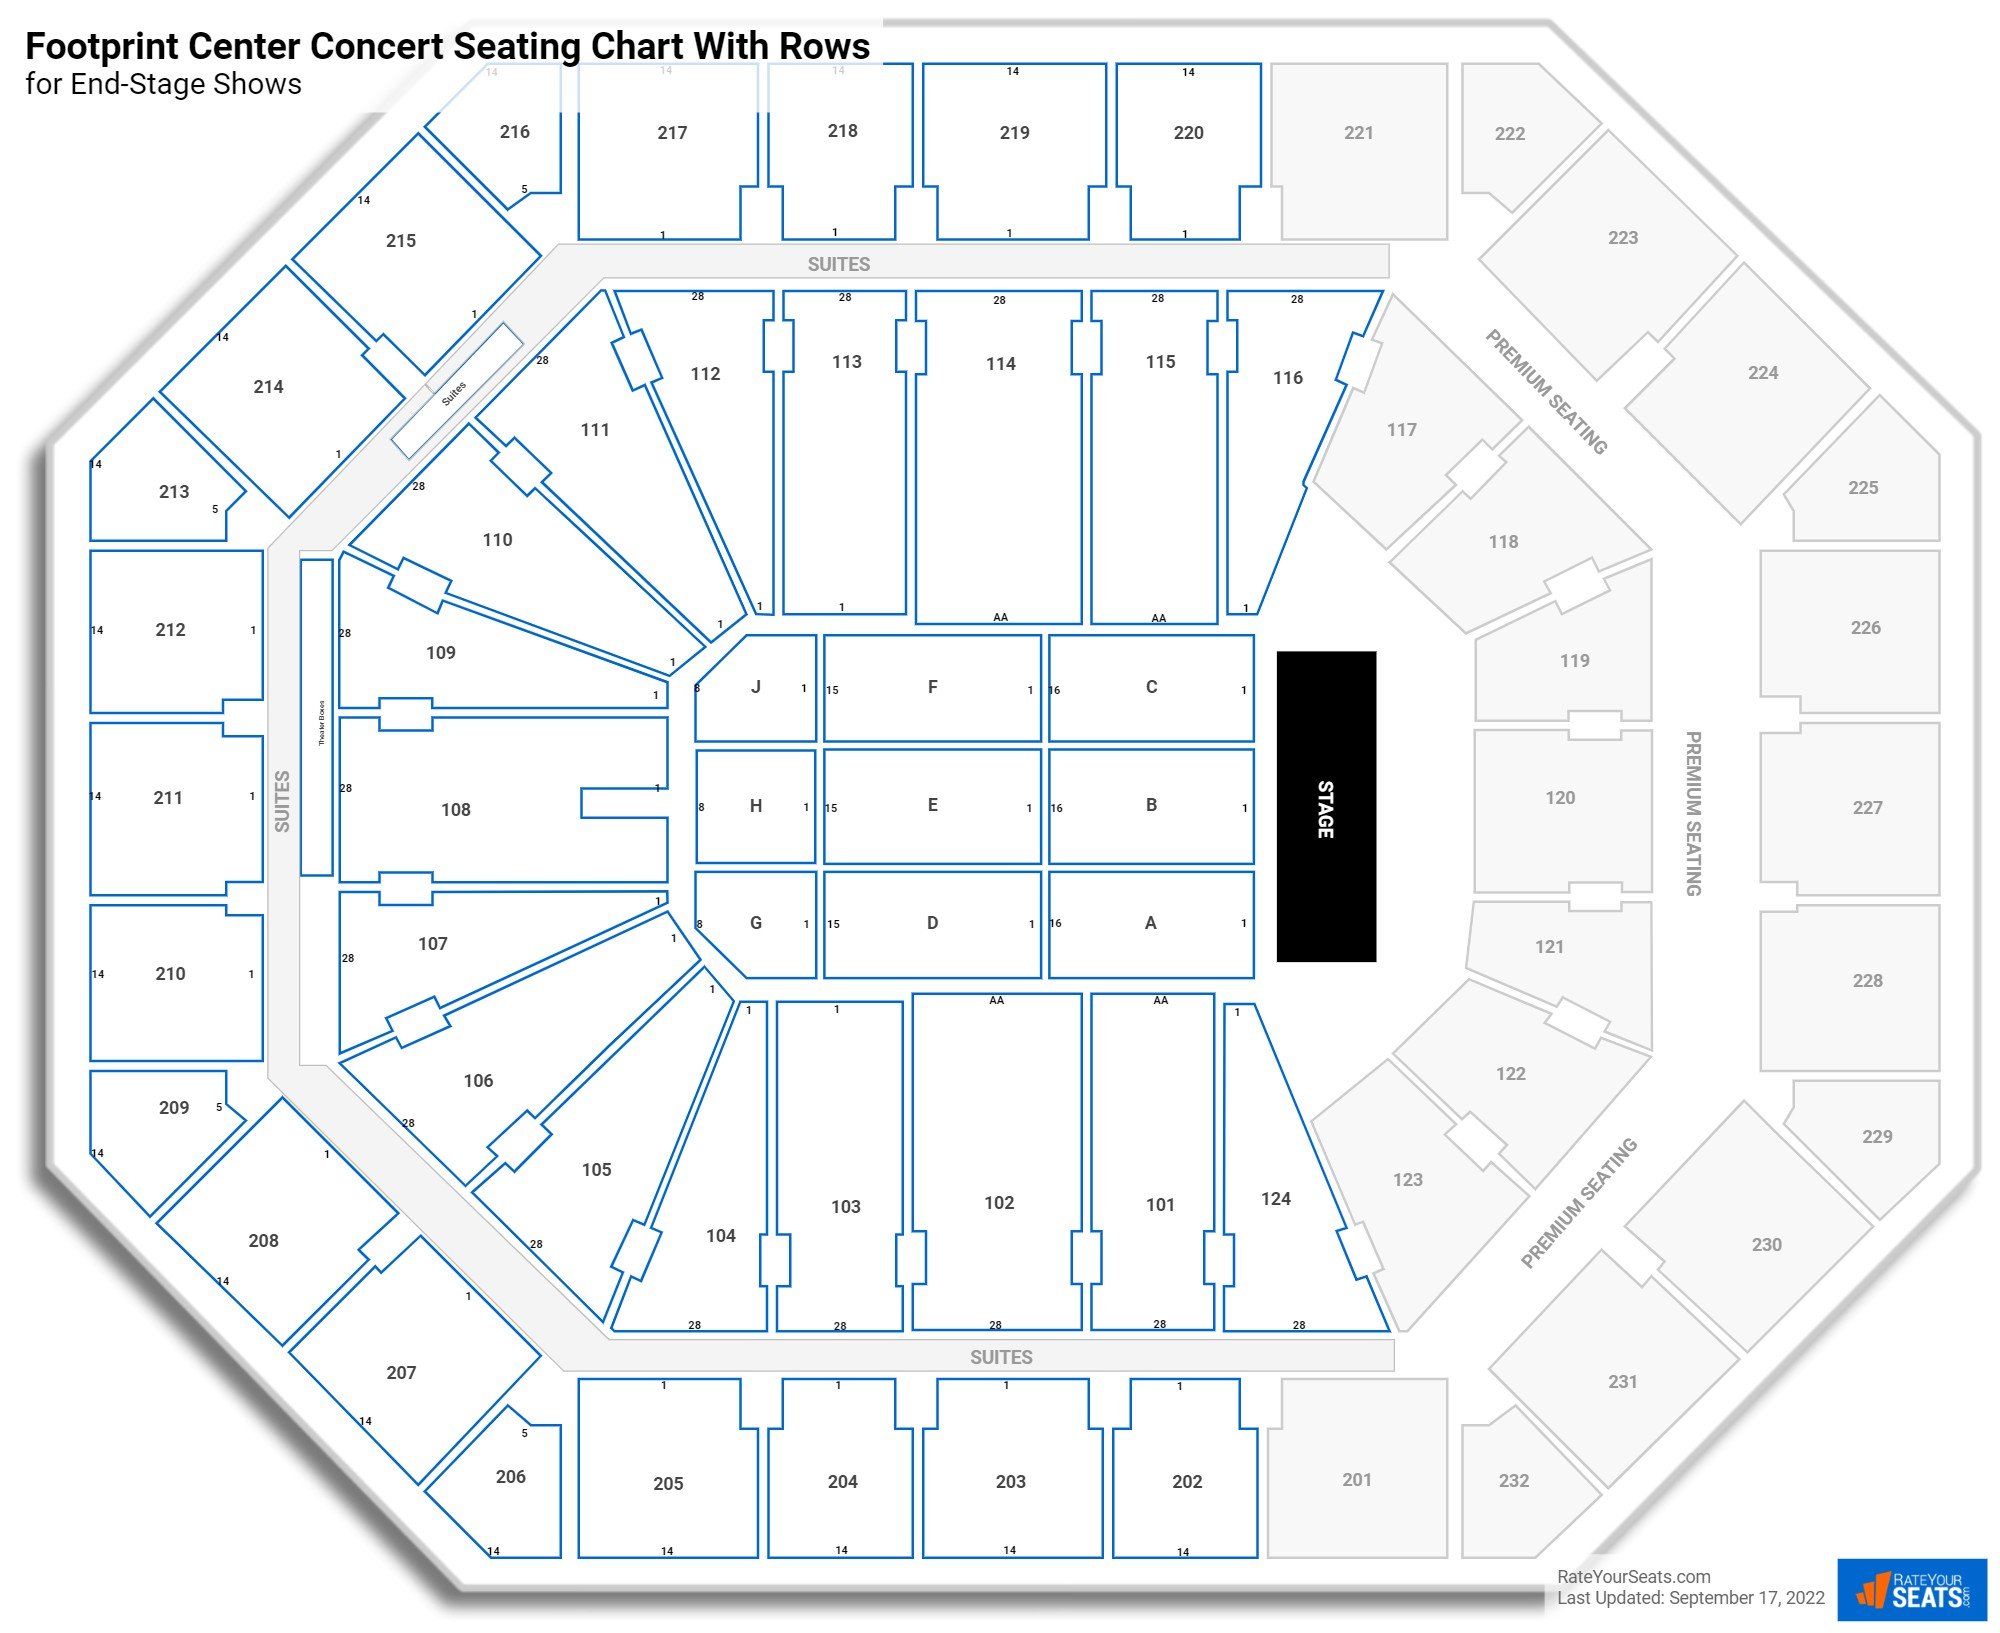 French Resort Concert Seating Chart